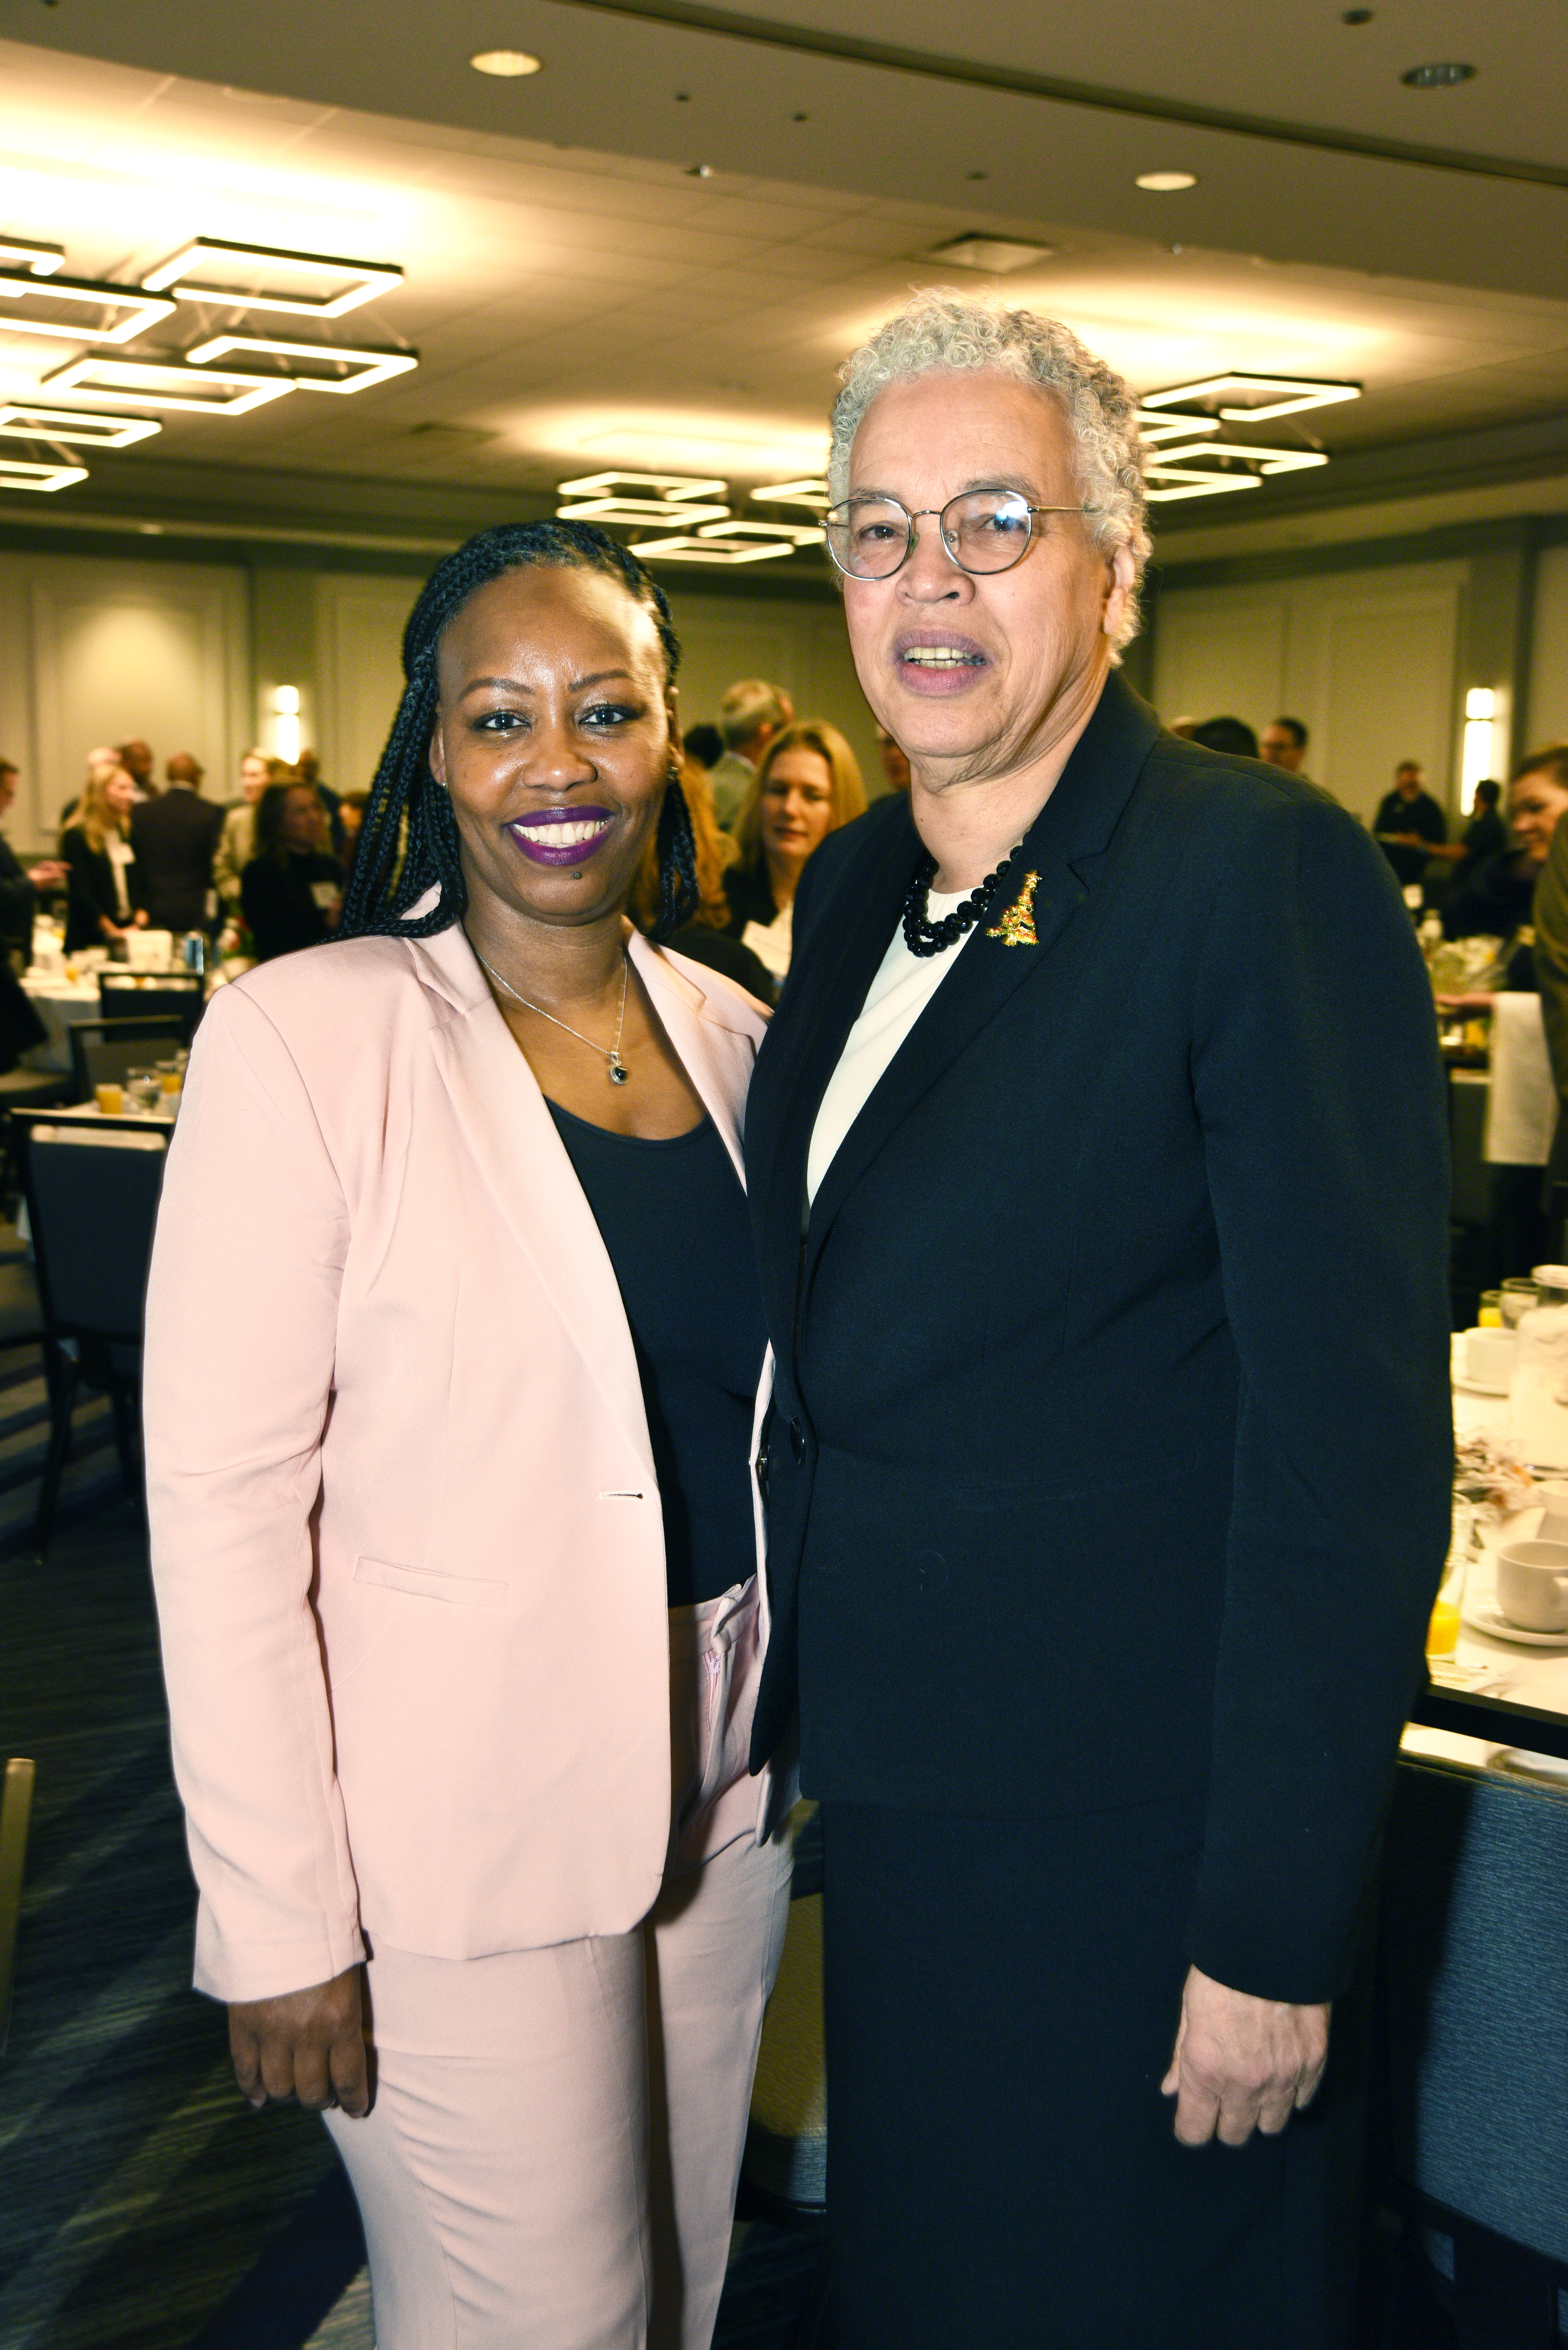 Cook County Chief of Staff Lanetta Haynes Turner and Cook County Board President Toni Preckwinkle